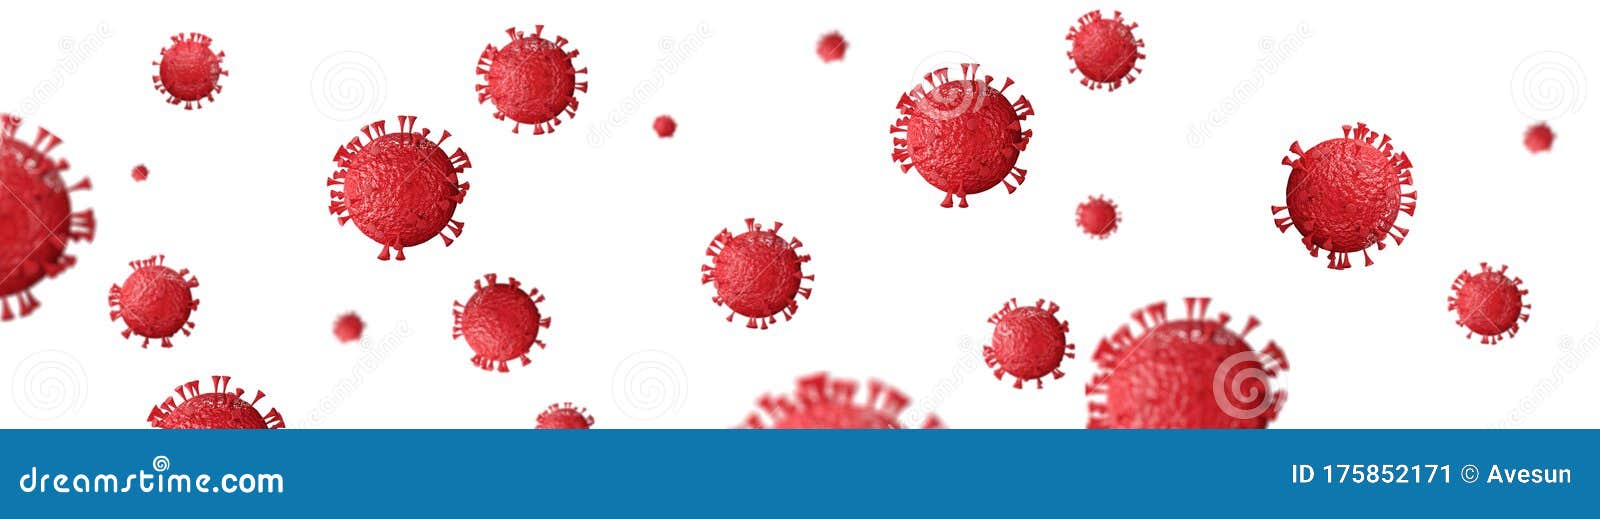 abstract concept of corona virus on white background